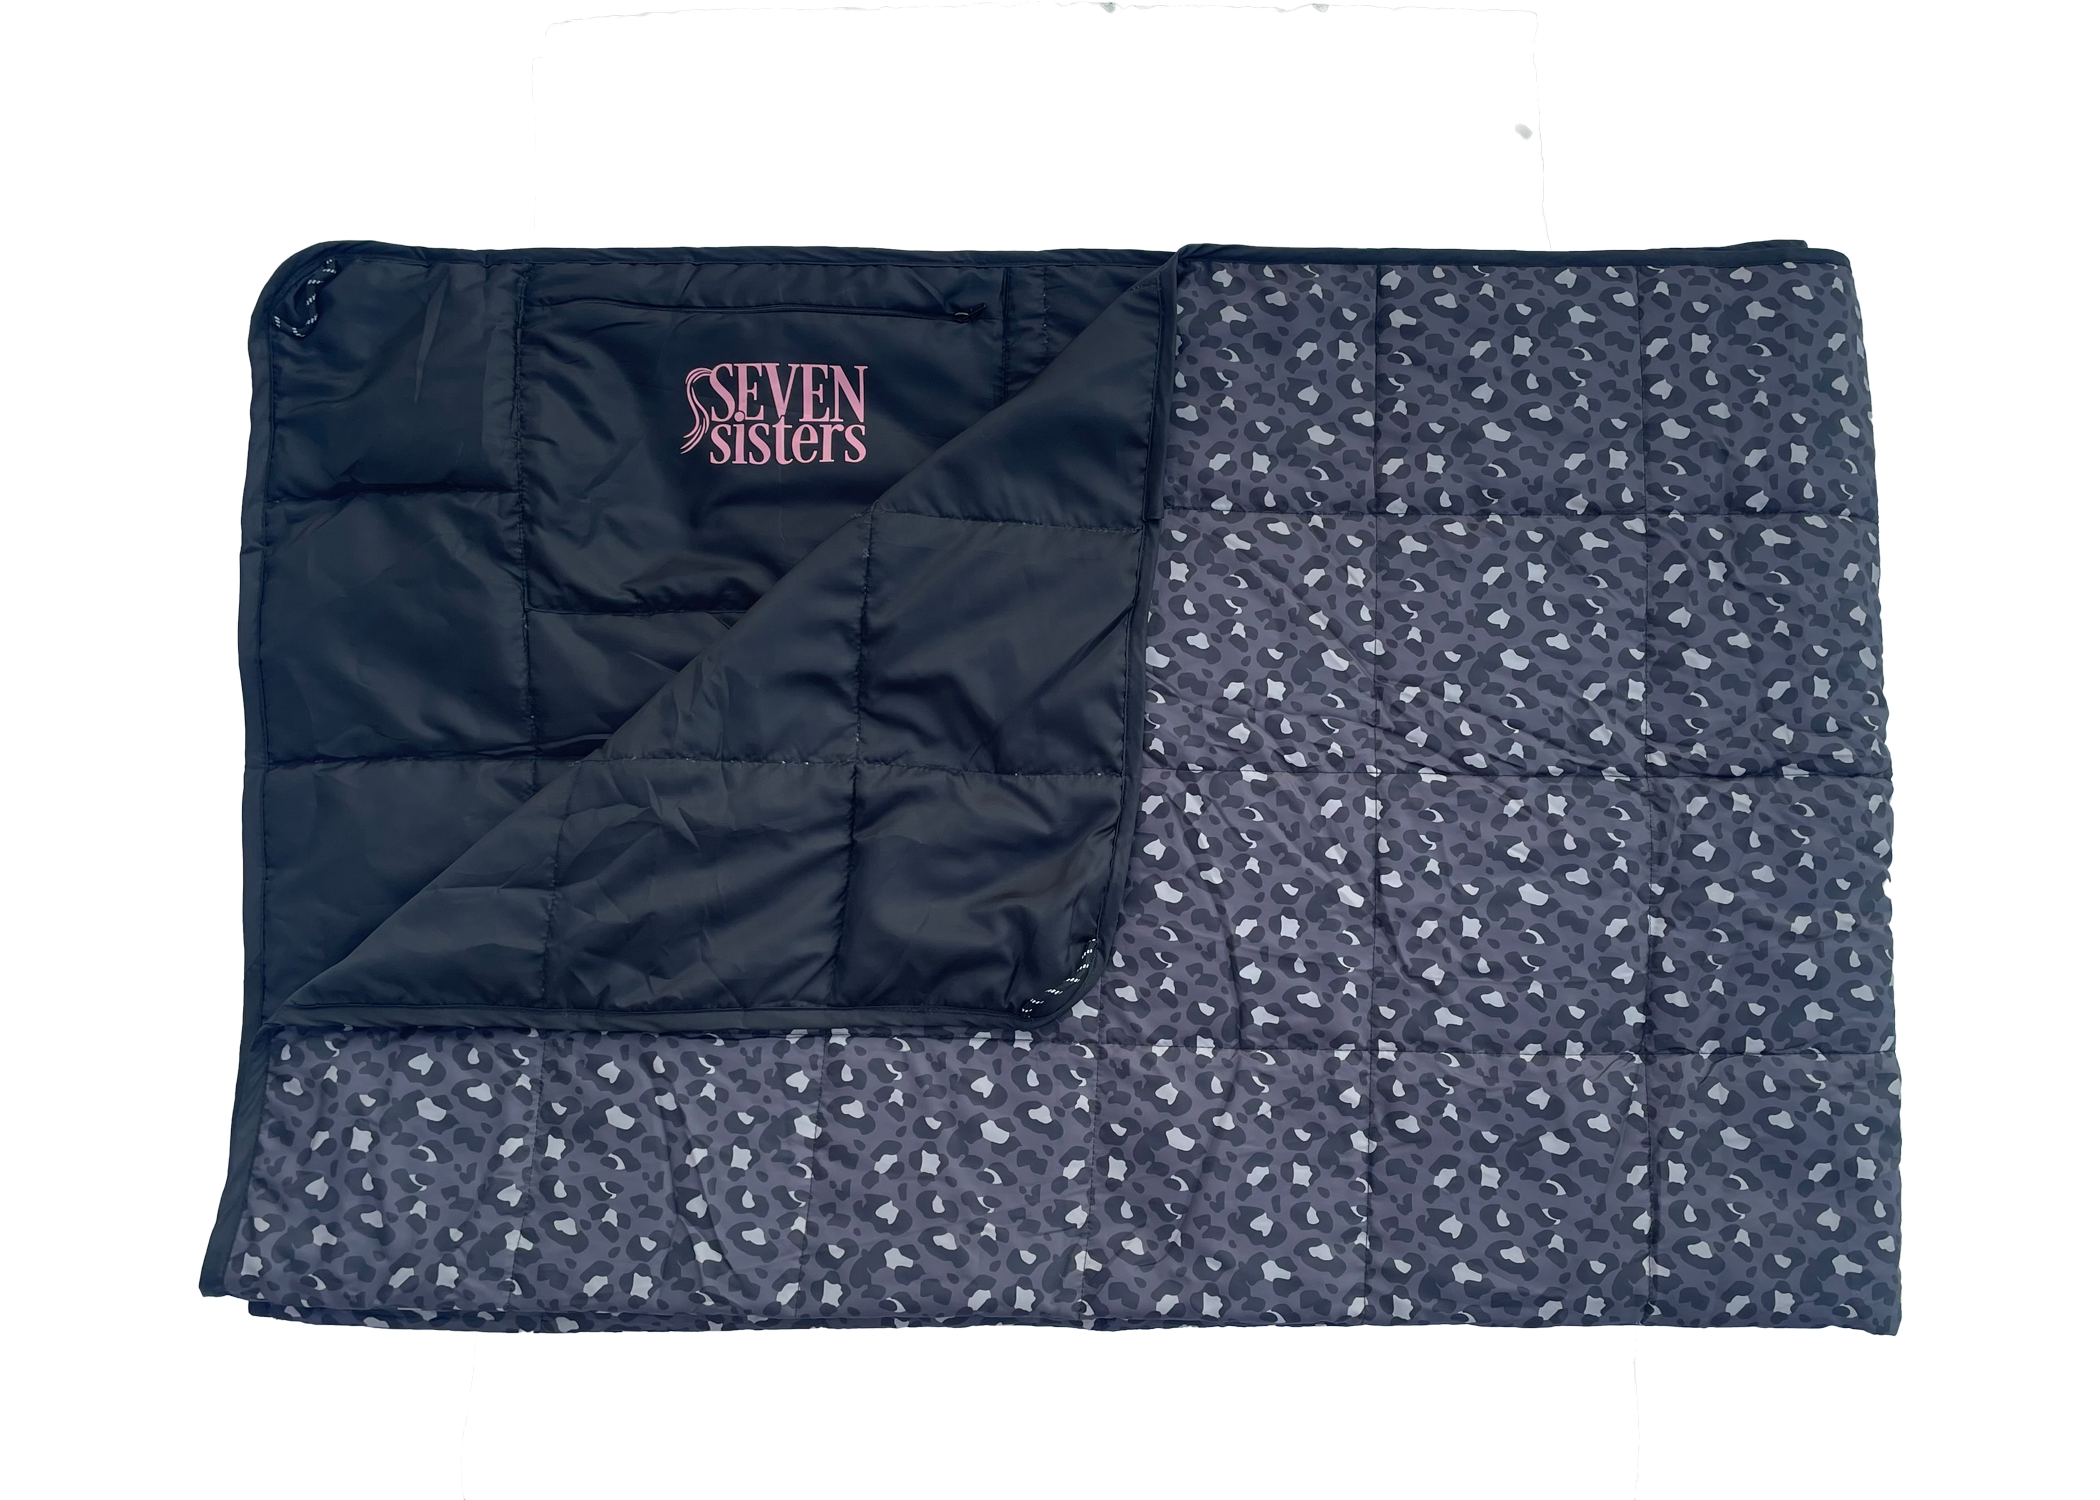 Introducing the Seven Sisters Sammie Snug Weighted Blanket - the perfect companion for outdoor activities like camping, picnics, and kids' sporting events. This waterproof and weighted blanket provides comfort and relaxation wherever you go. With its versatile design, it can also be used as a regular blanket for everyday use. Stay cozy and snug with the Seven Sisters Sammie Snug Weighted Blanket.